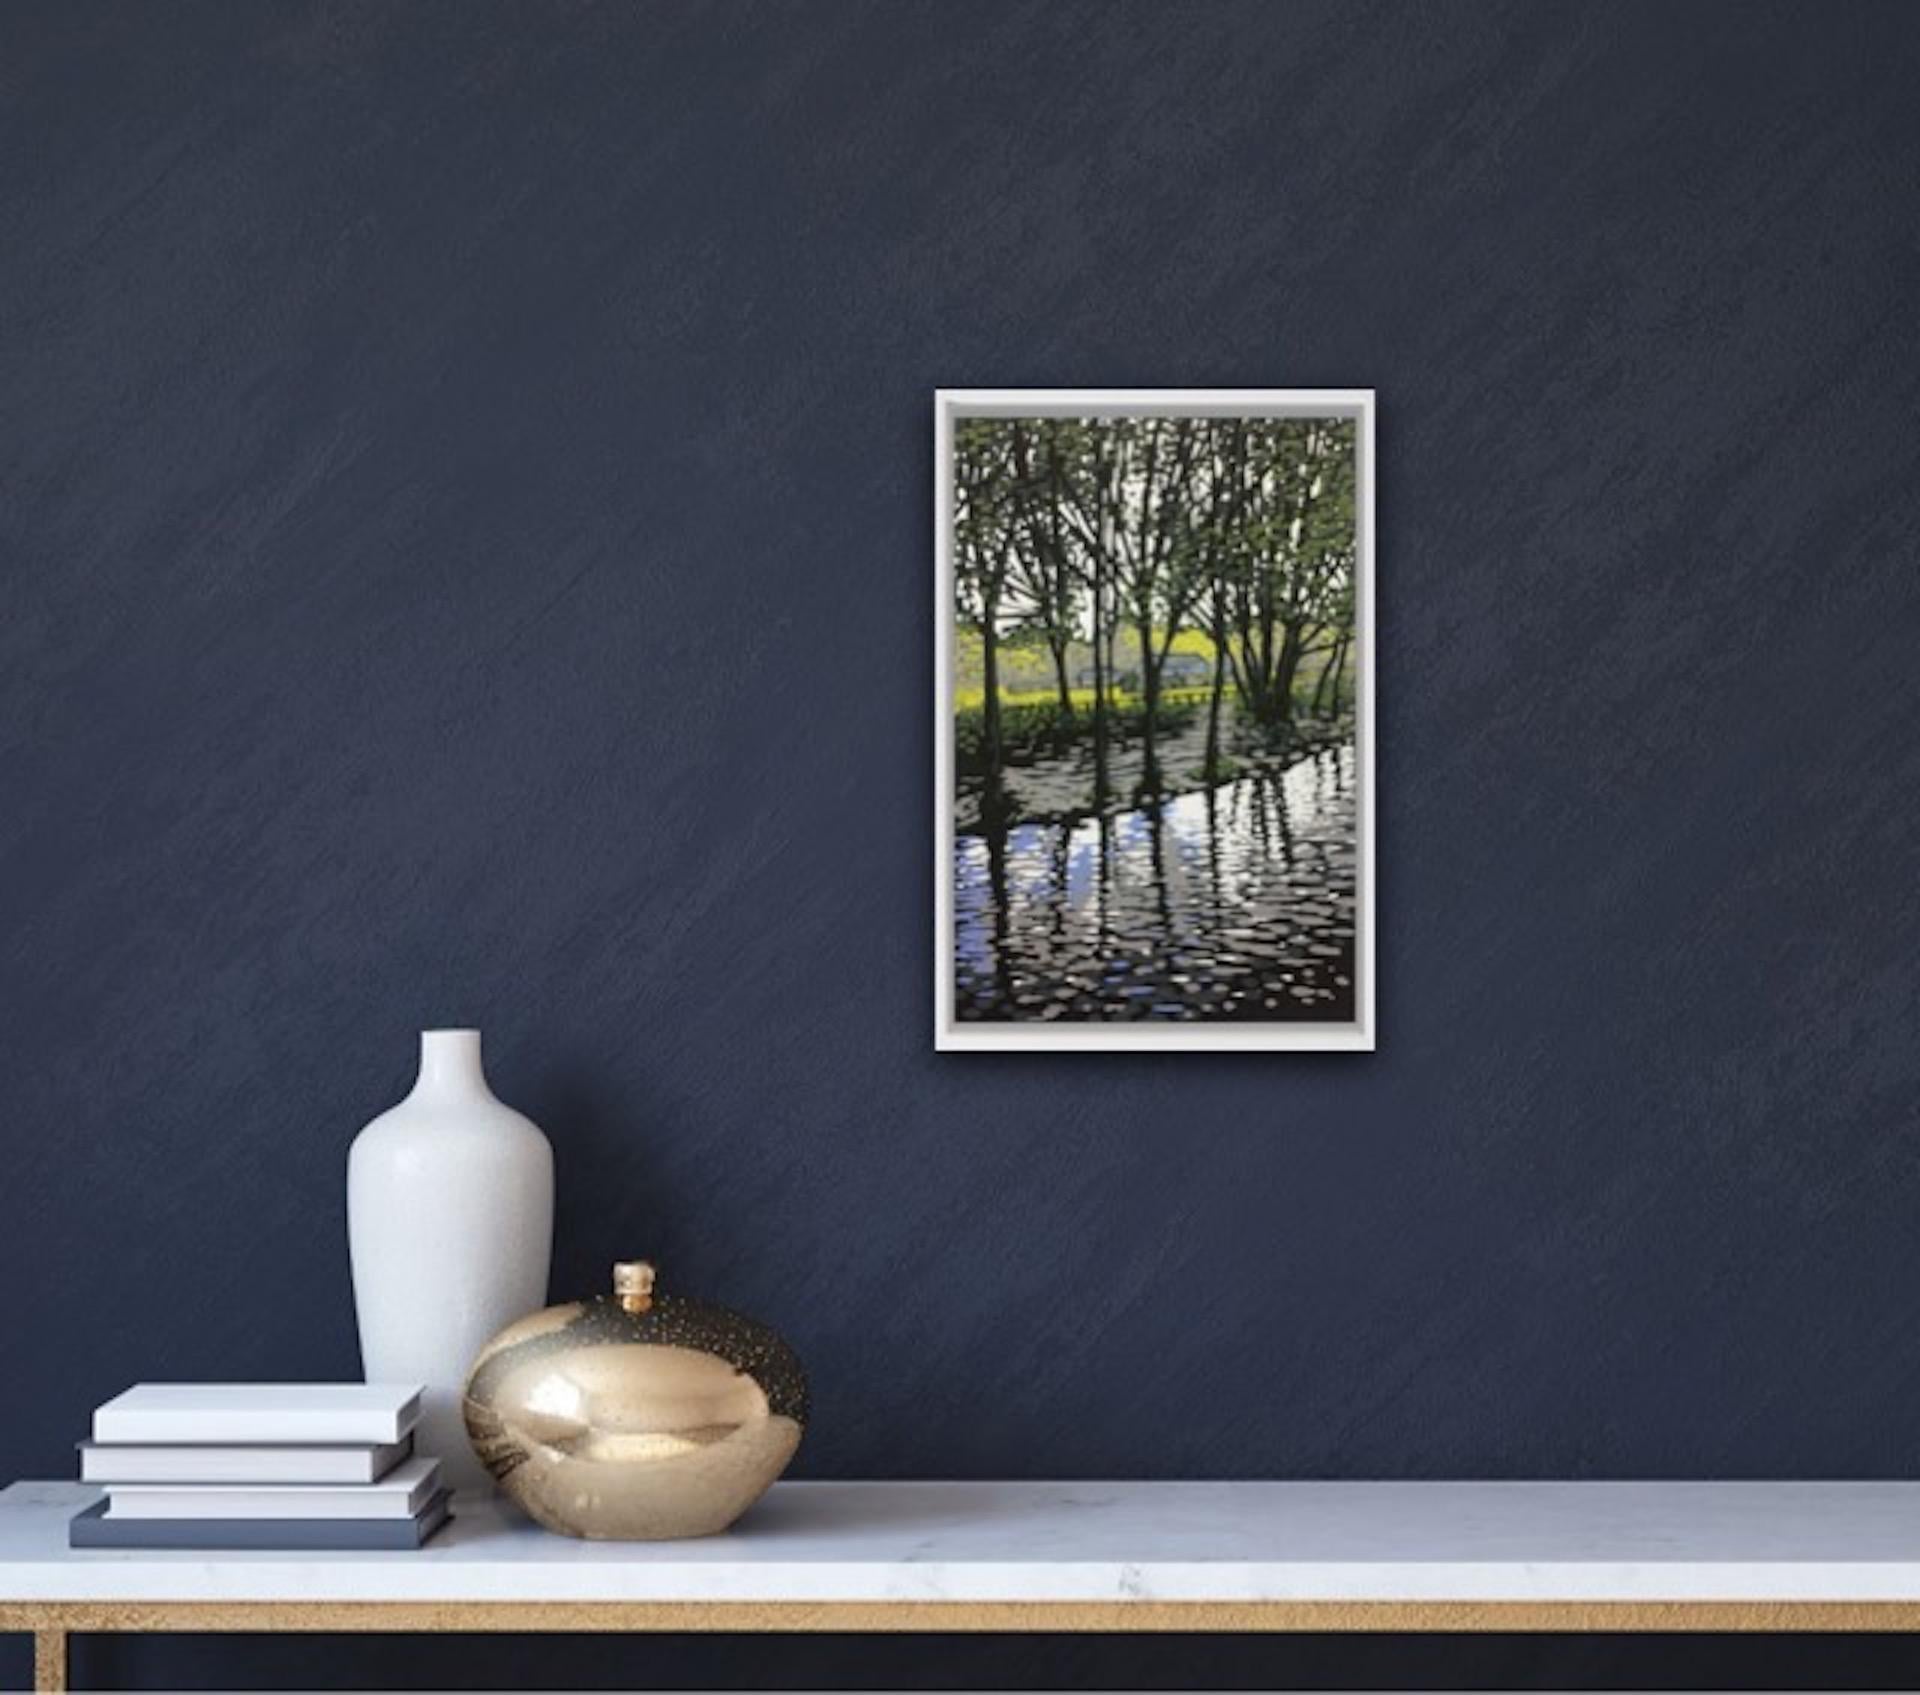 Alexandra Buckle
Grasmere River
Limited Edition Linocut Print
Edition of 9
Image Size: H 30cm x W 20cm
Sheet Size: H 41cm x W 31cm
Sold Unframed
Please note that insitu images are purely an indication of how a piece may look.

Grasmere River is a